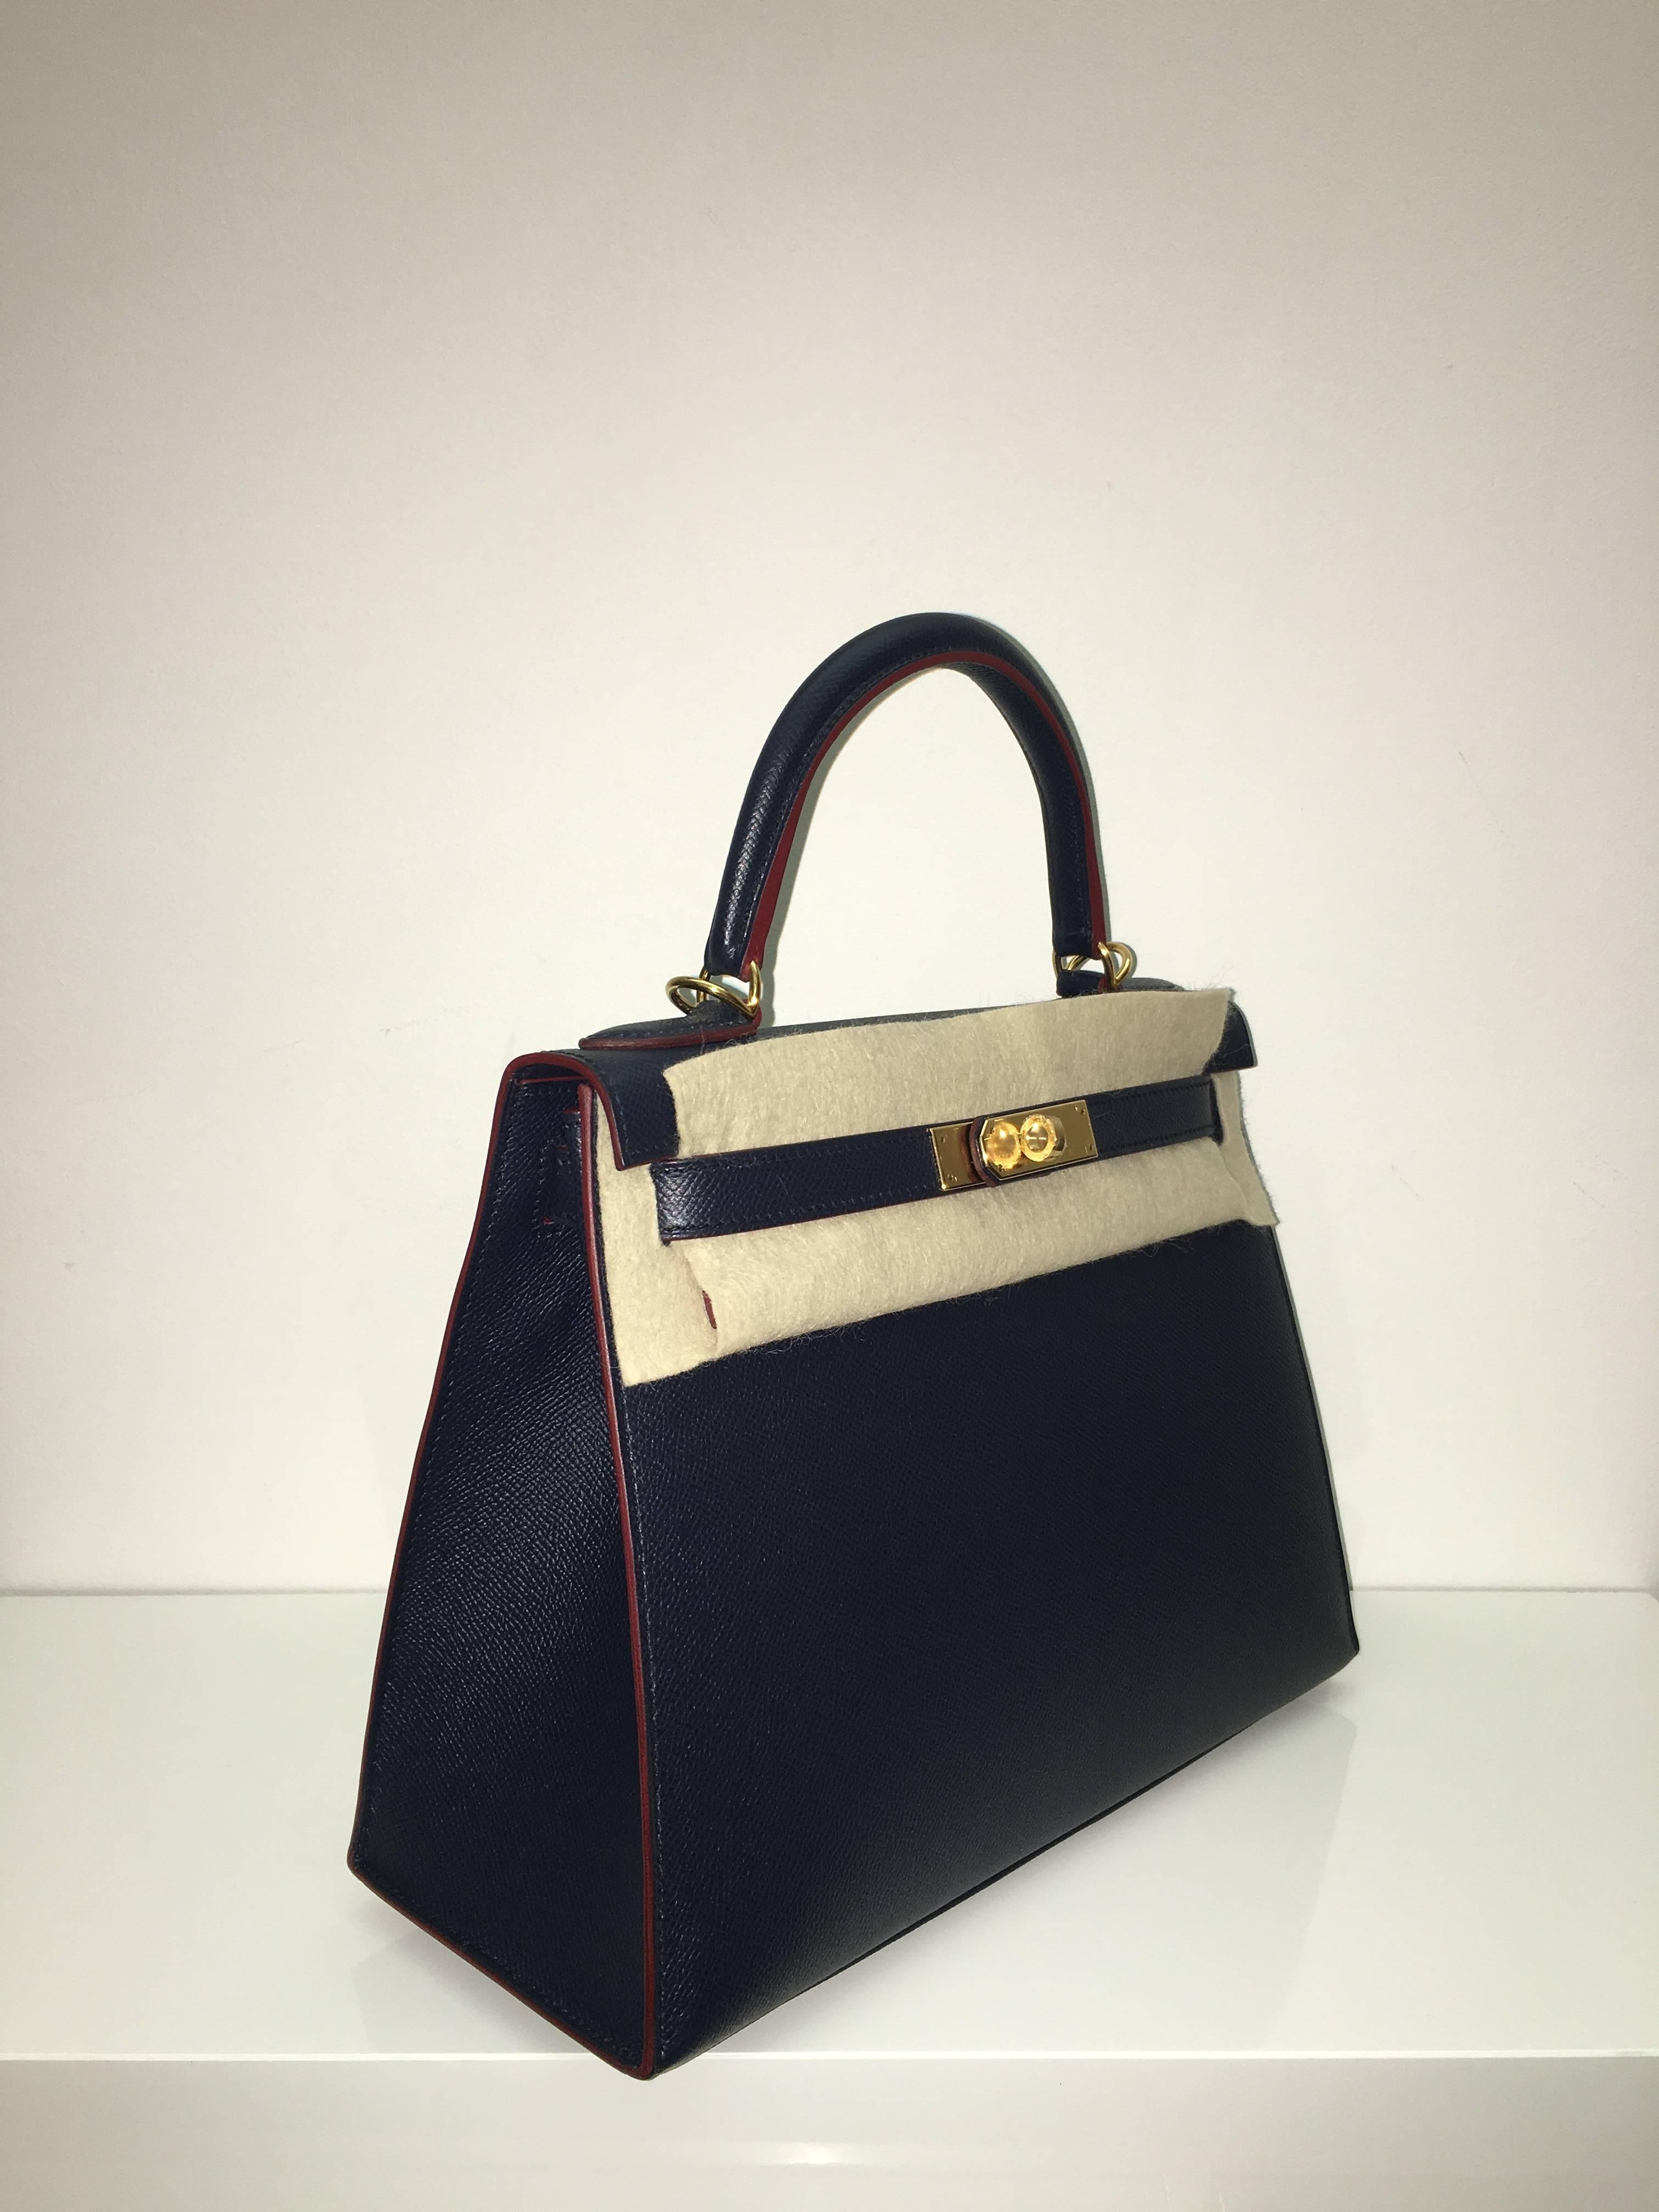 Hermes 
Kelly Size 28
Epsom Leather 
Colour Blue Indigo/Rouge H contour
Gold Hardware 
store fresh, comes with receipt and full set (dust bag, box...) 
Hydeparkfashion specializes in sourcing and delivering authentic luxury handbags, mainly